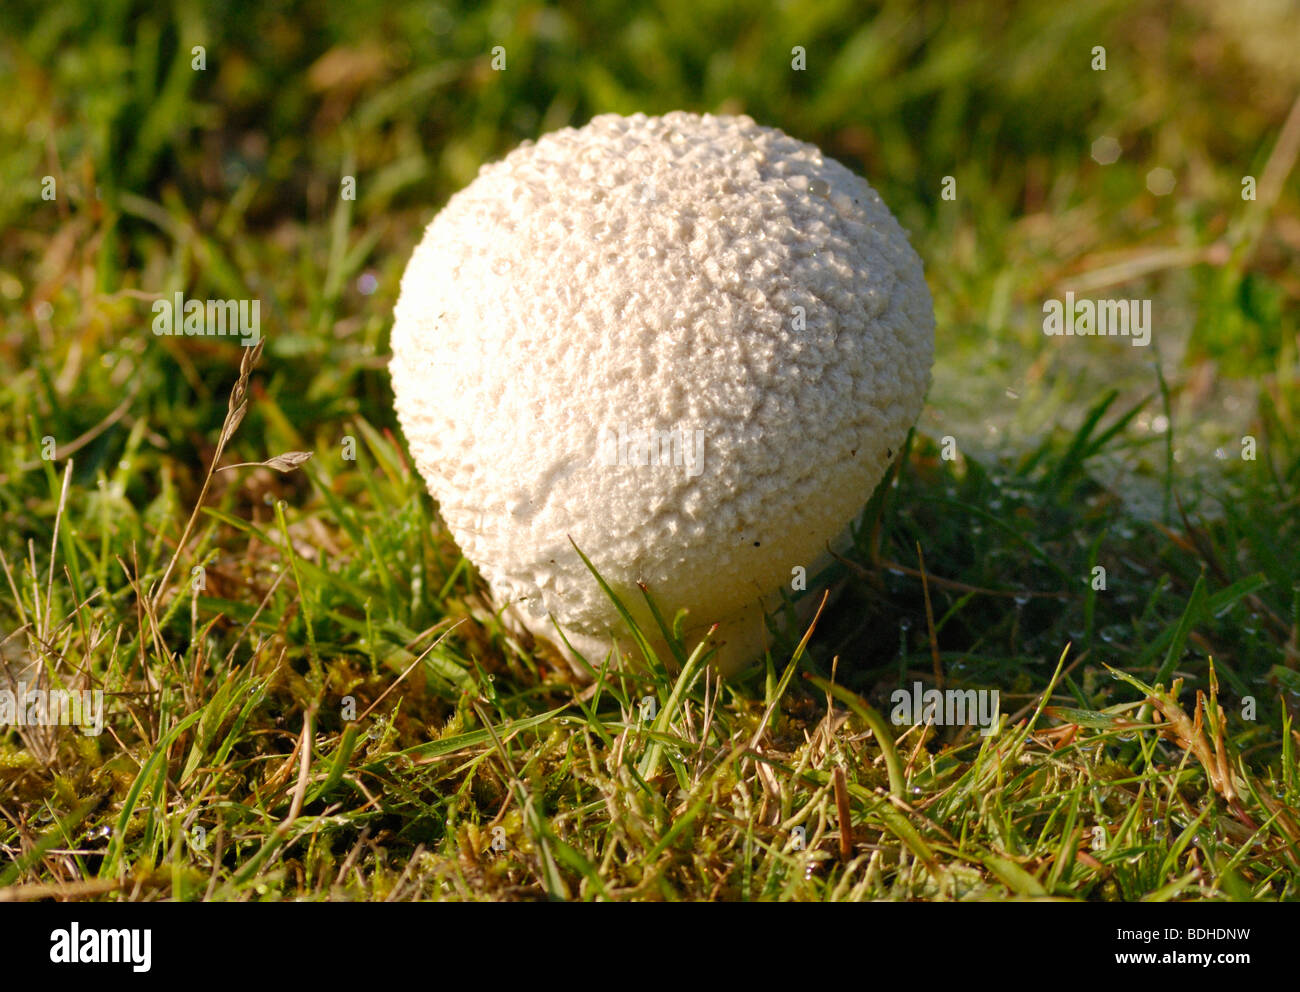 A Puffball fungus growing in a field Stock Photo